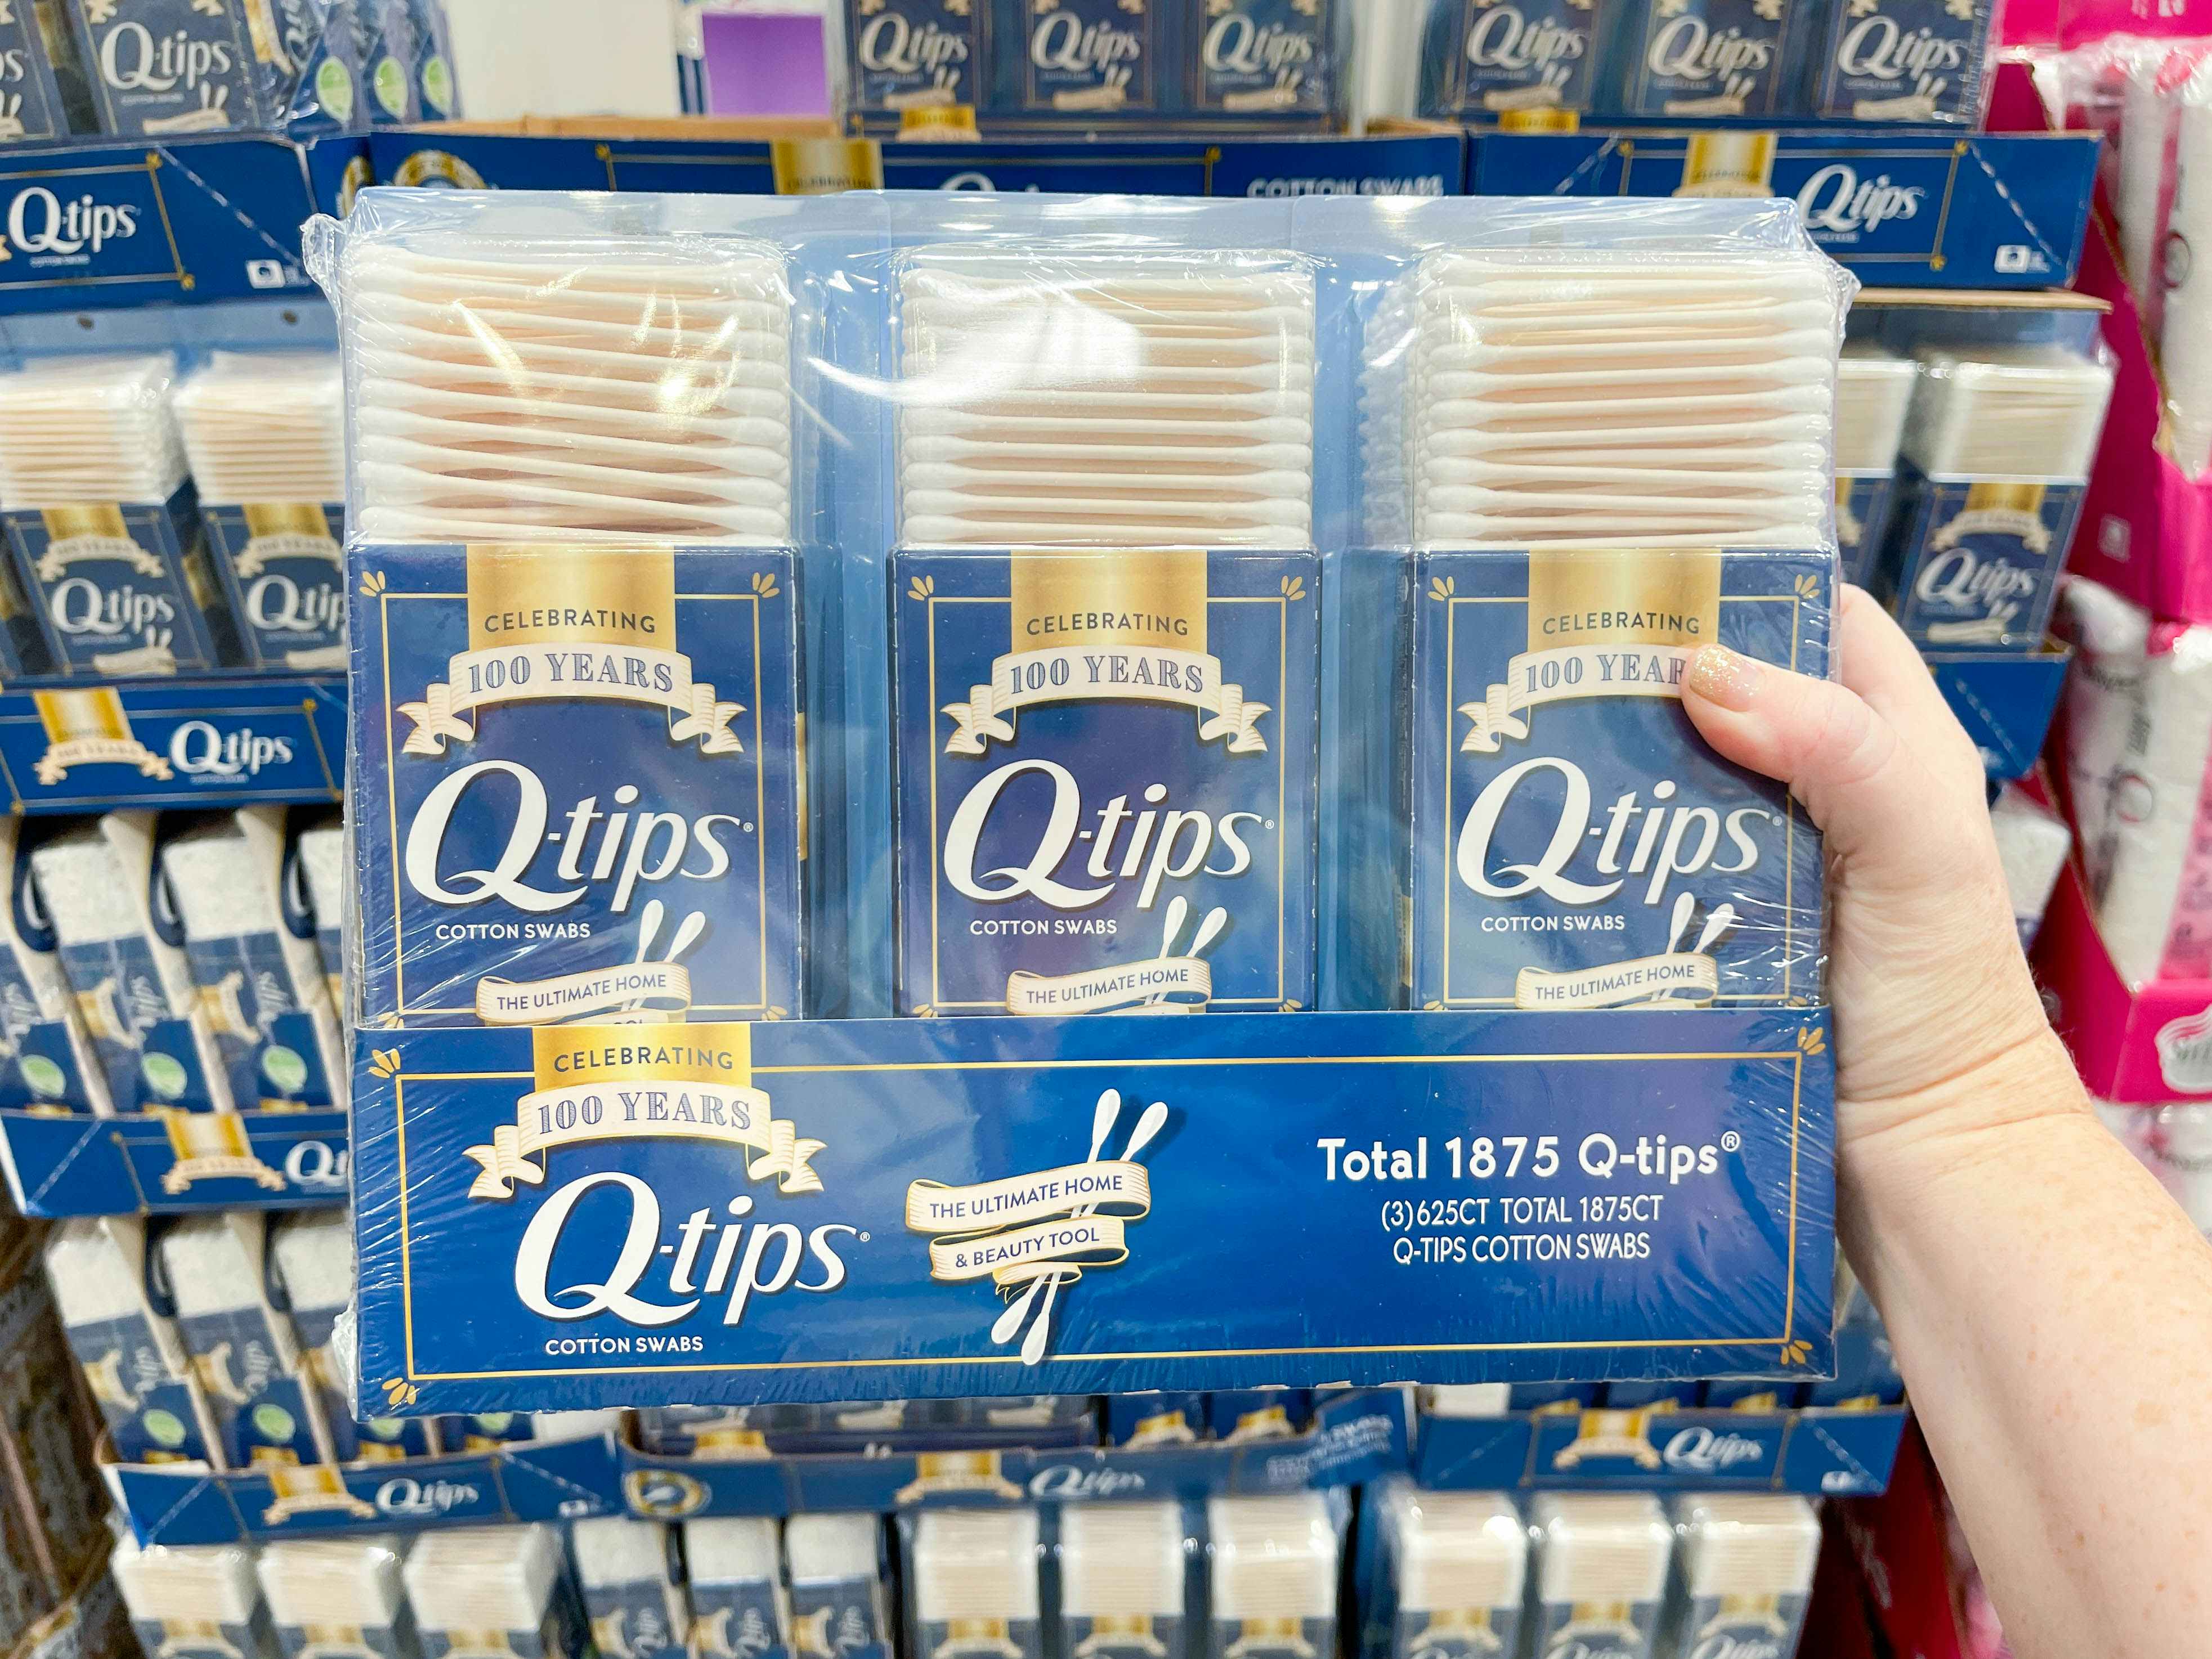 a package of qtips being held in store